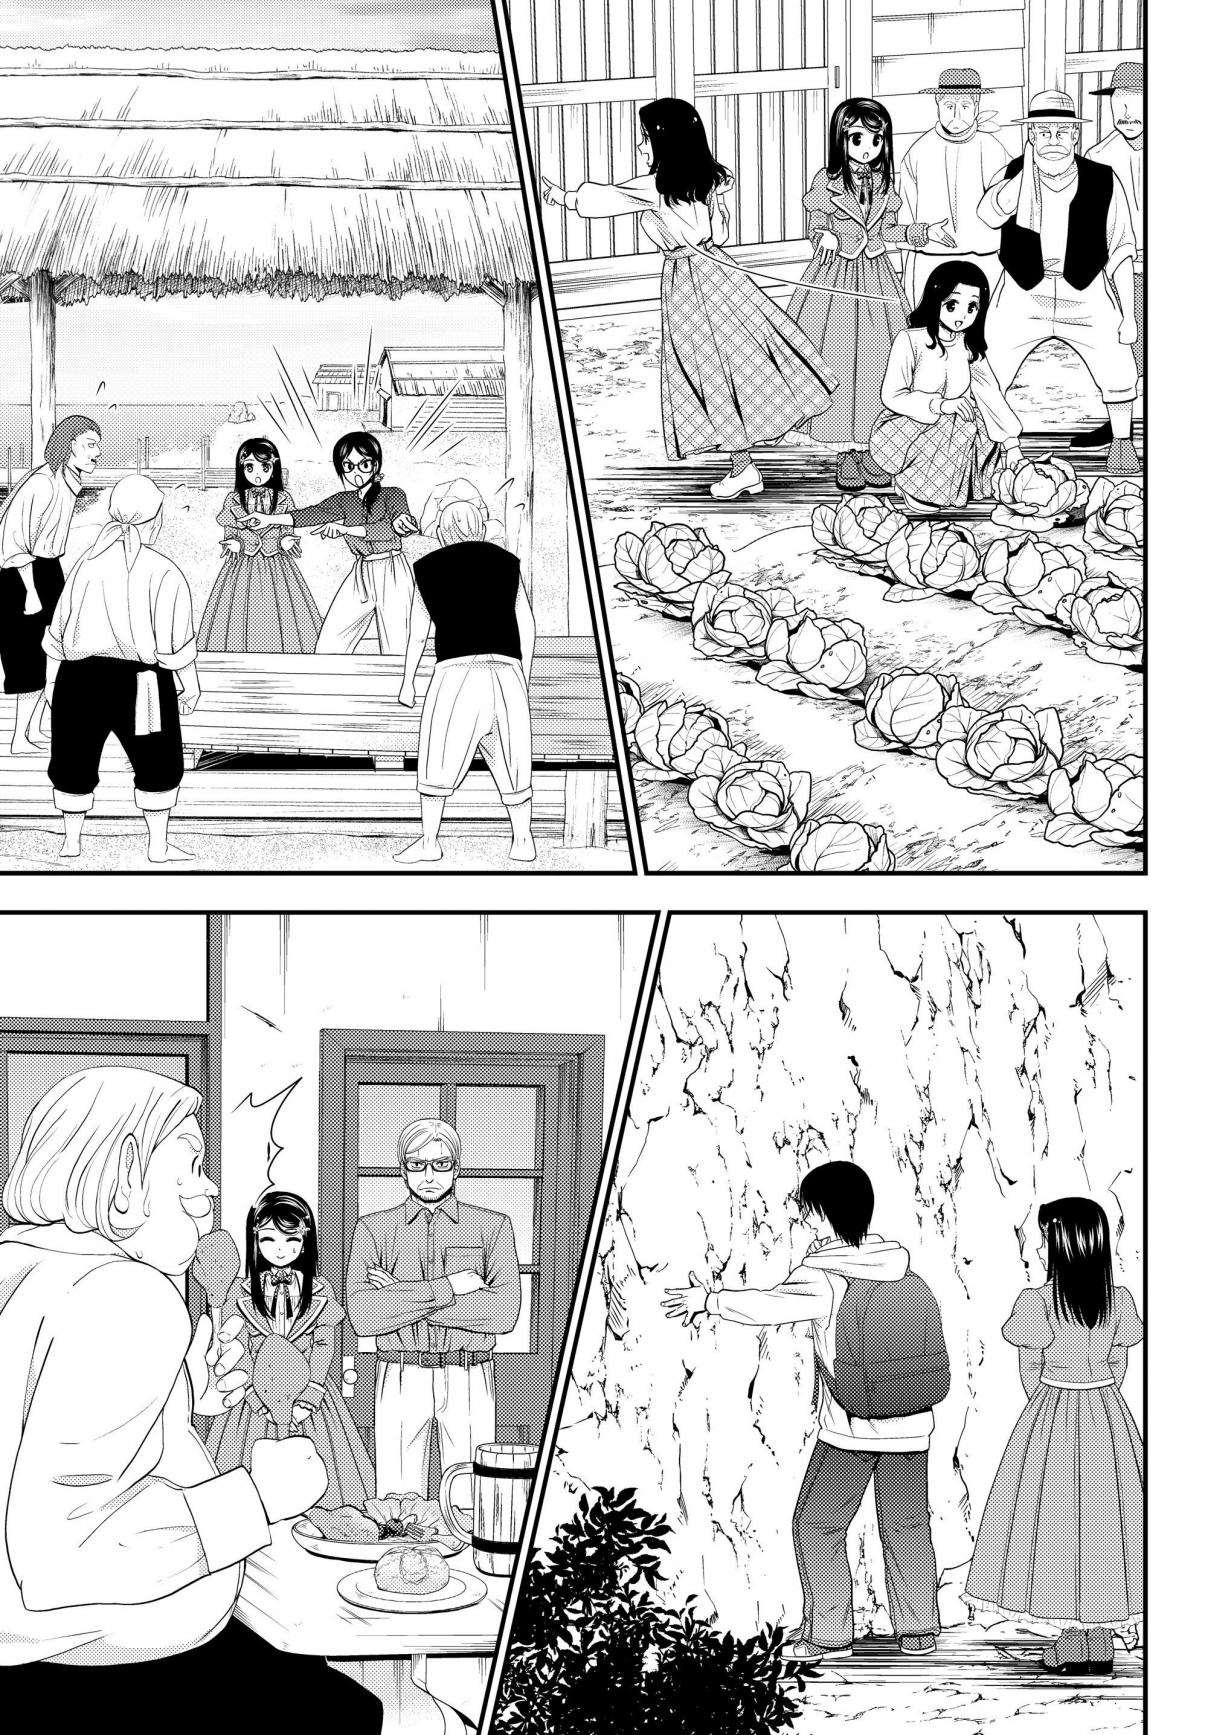 Saving 80,000 Gold Coins in the Different World for My Old Age Vol. 6 Ch. 41 Other World Offline Meeting, Part 1